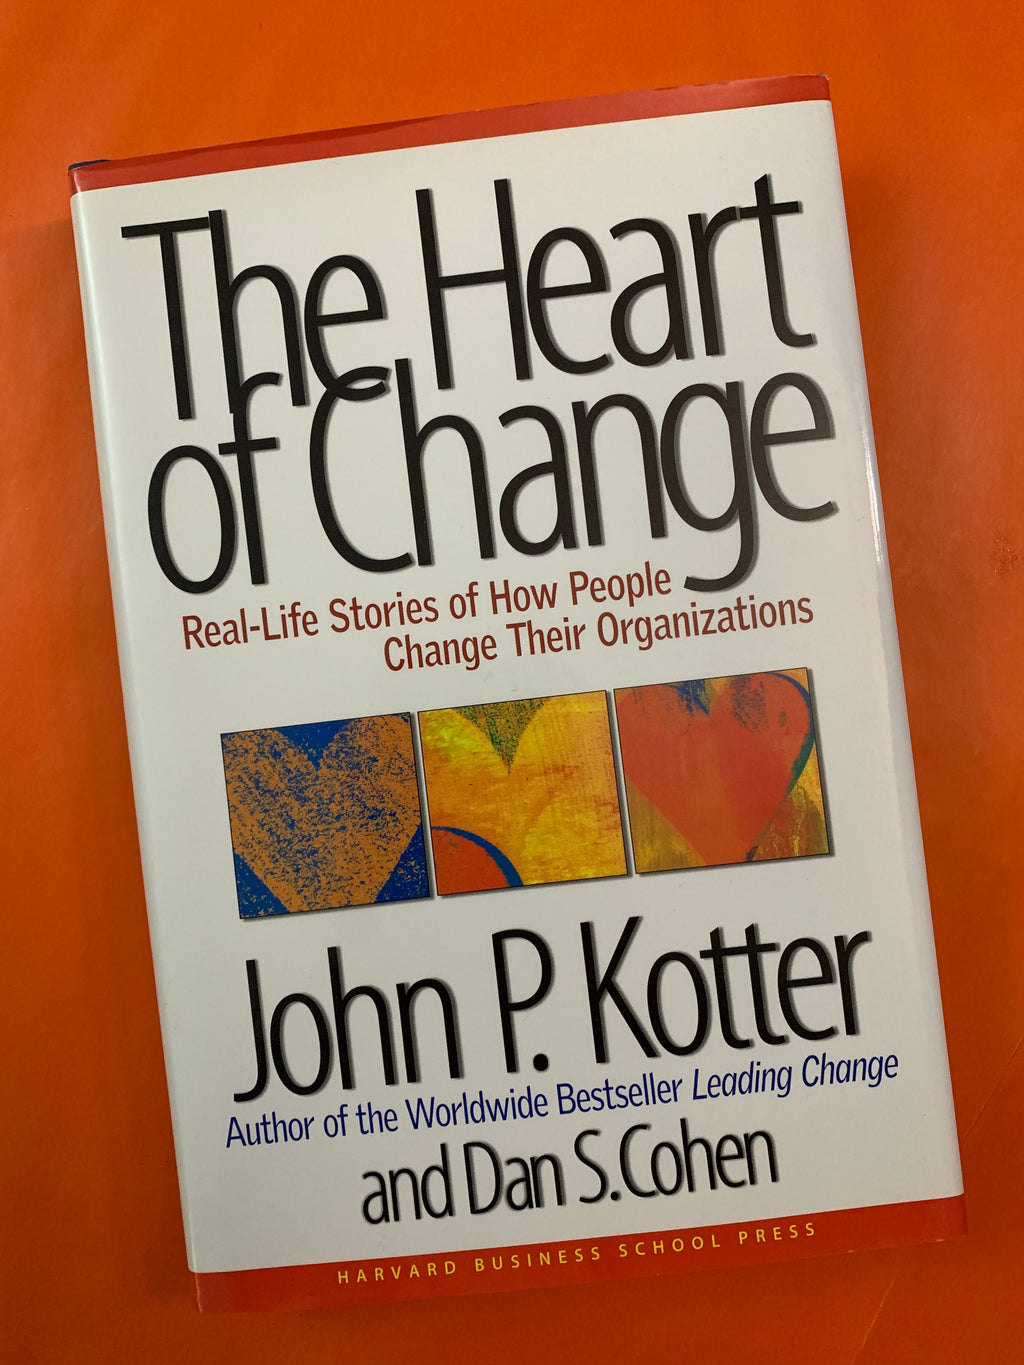 The Heart of Change: Real-Life Stories of How People Change Their Organizations- By John P. Kotter and Dan S. Cohen